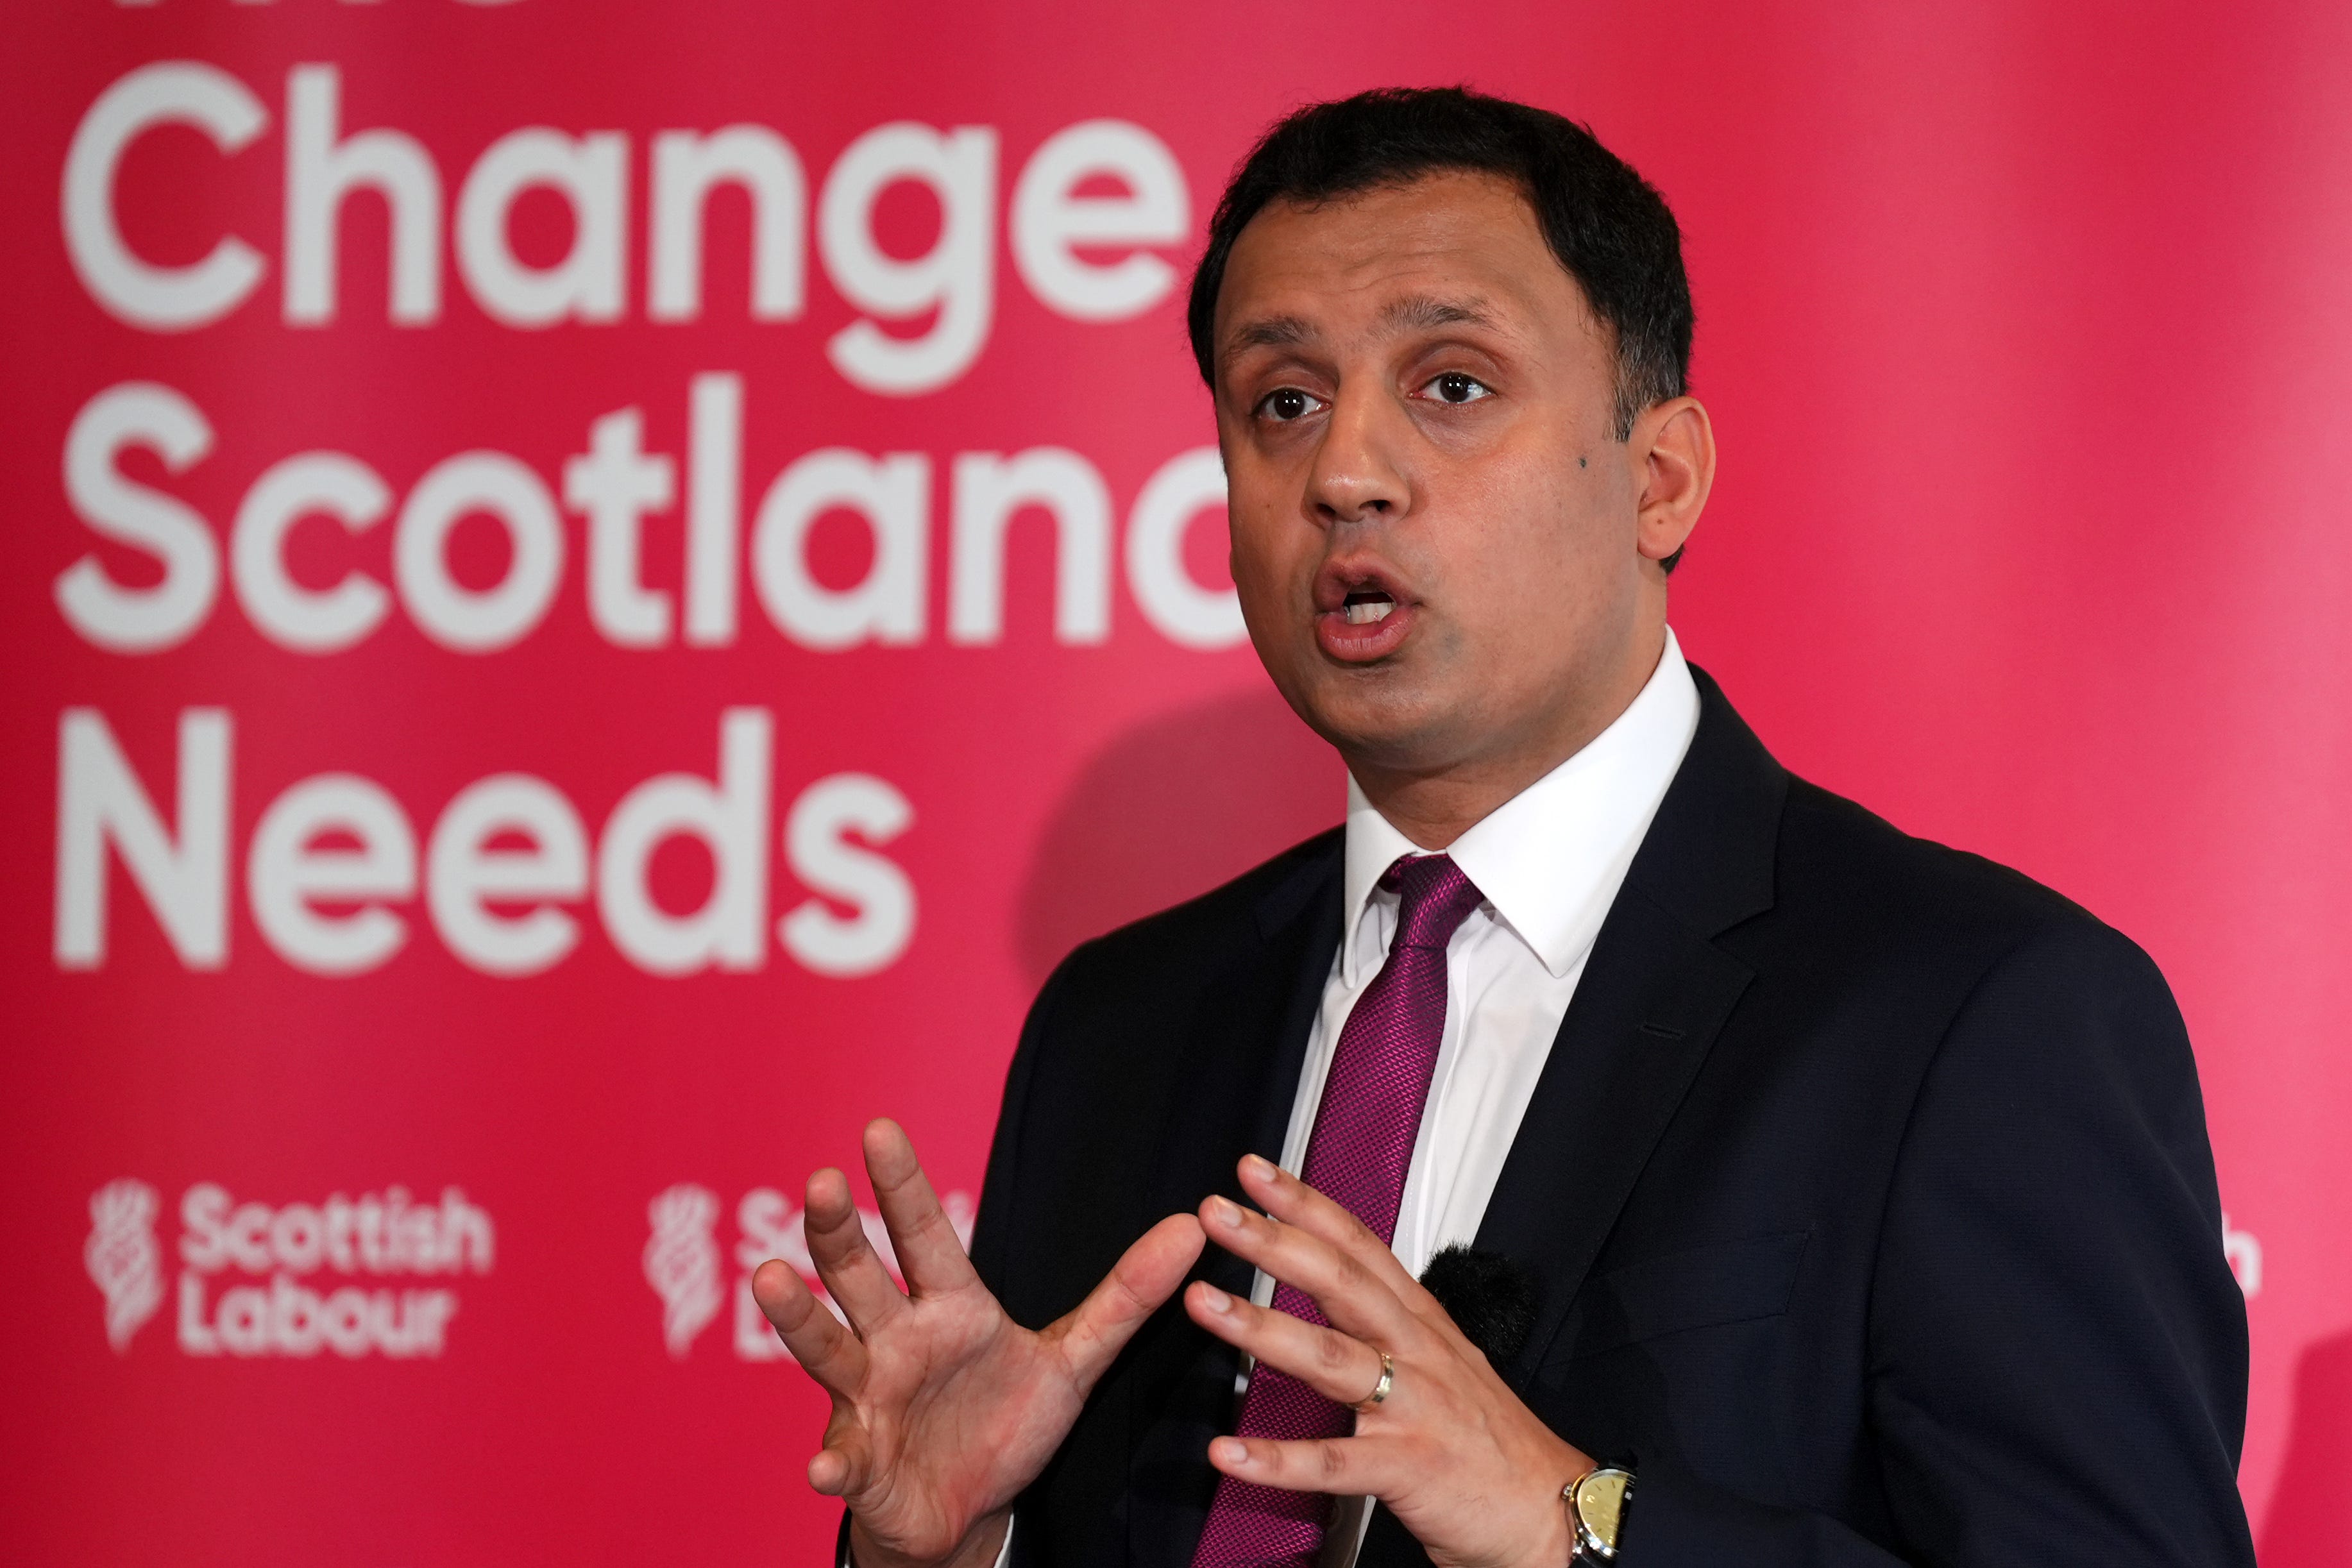 The Scottish Labour leader spoke as he entered the Glasgow count on Friday morning (Andrew Milligan/PA)